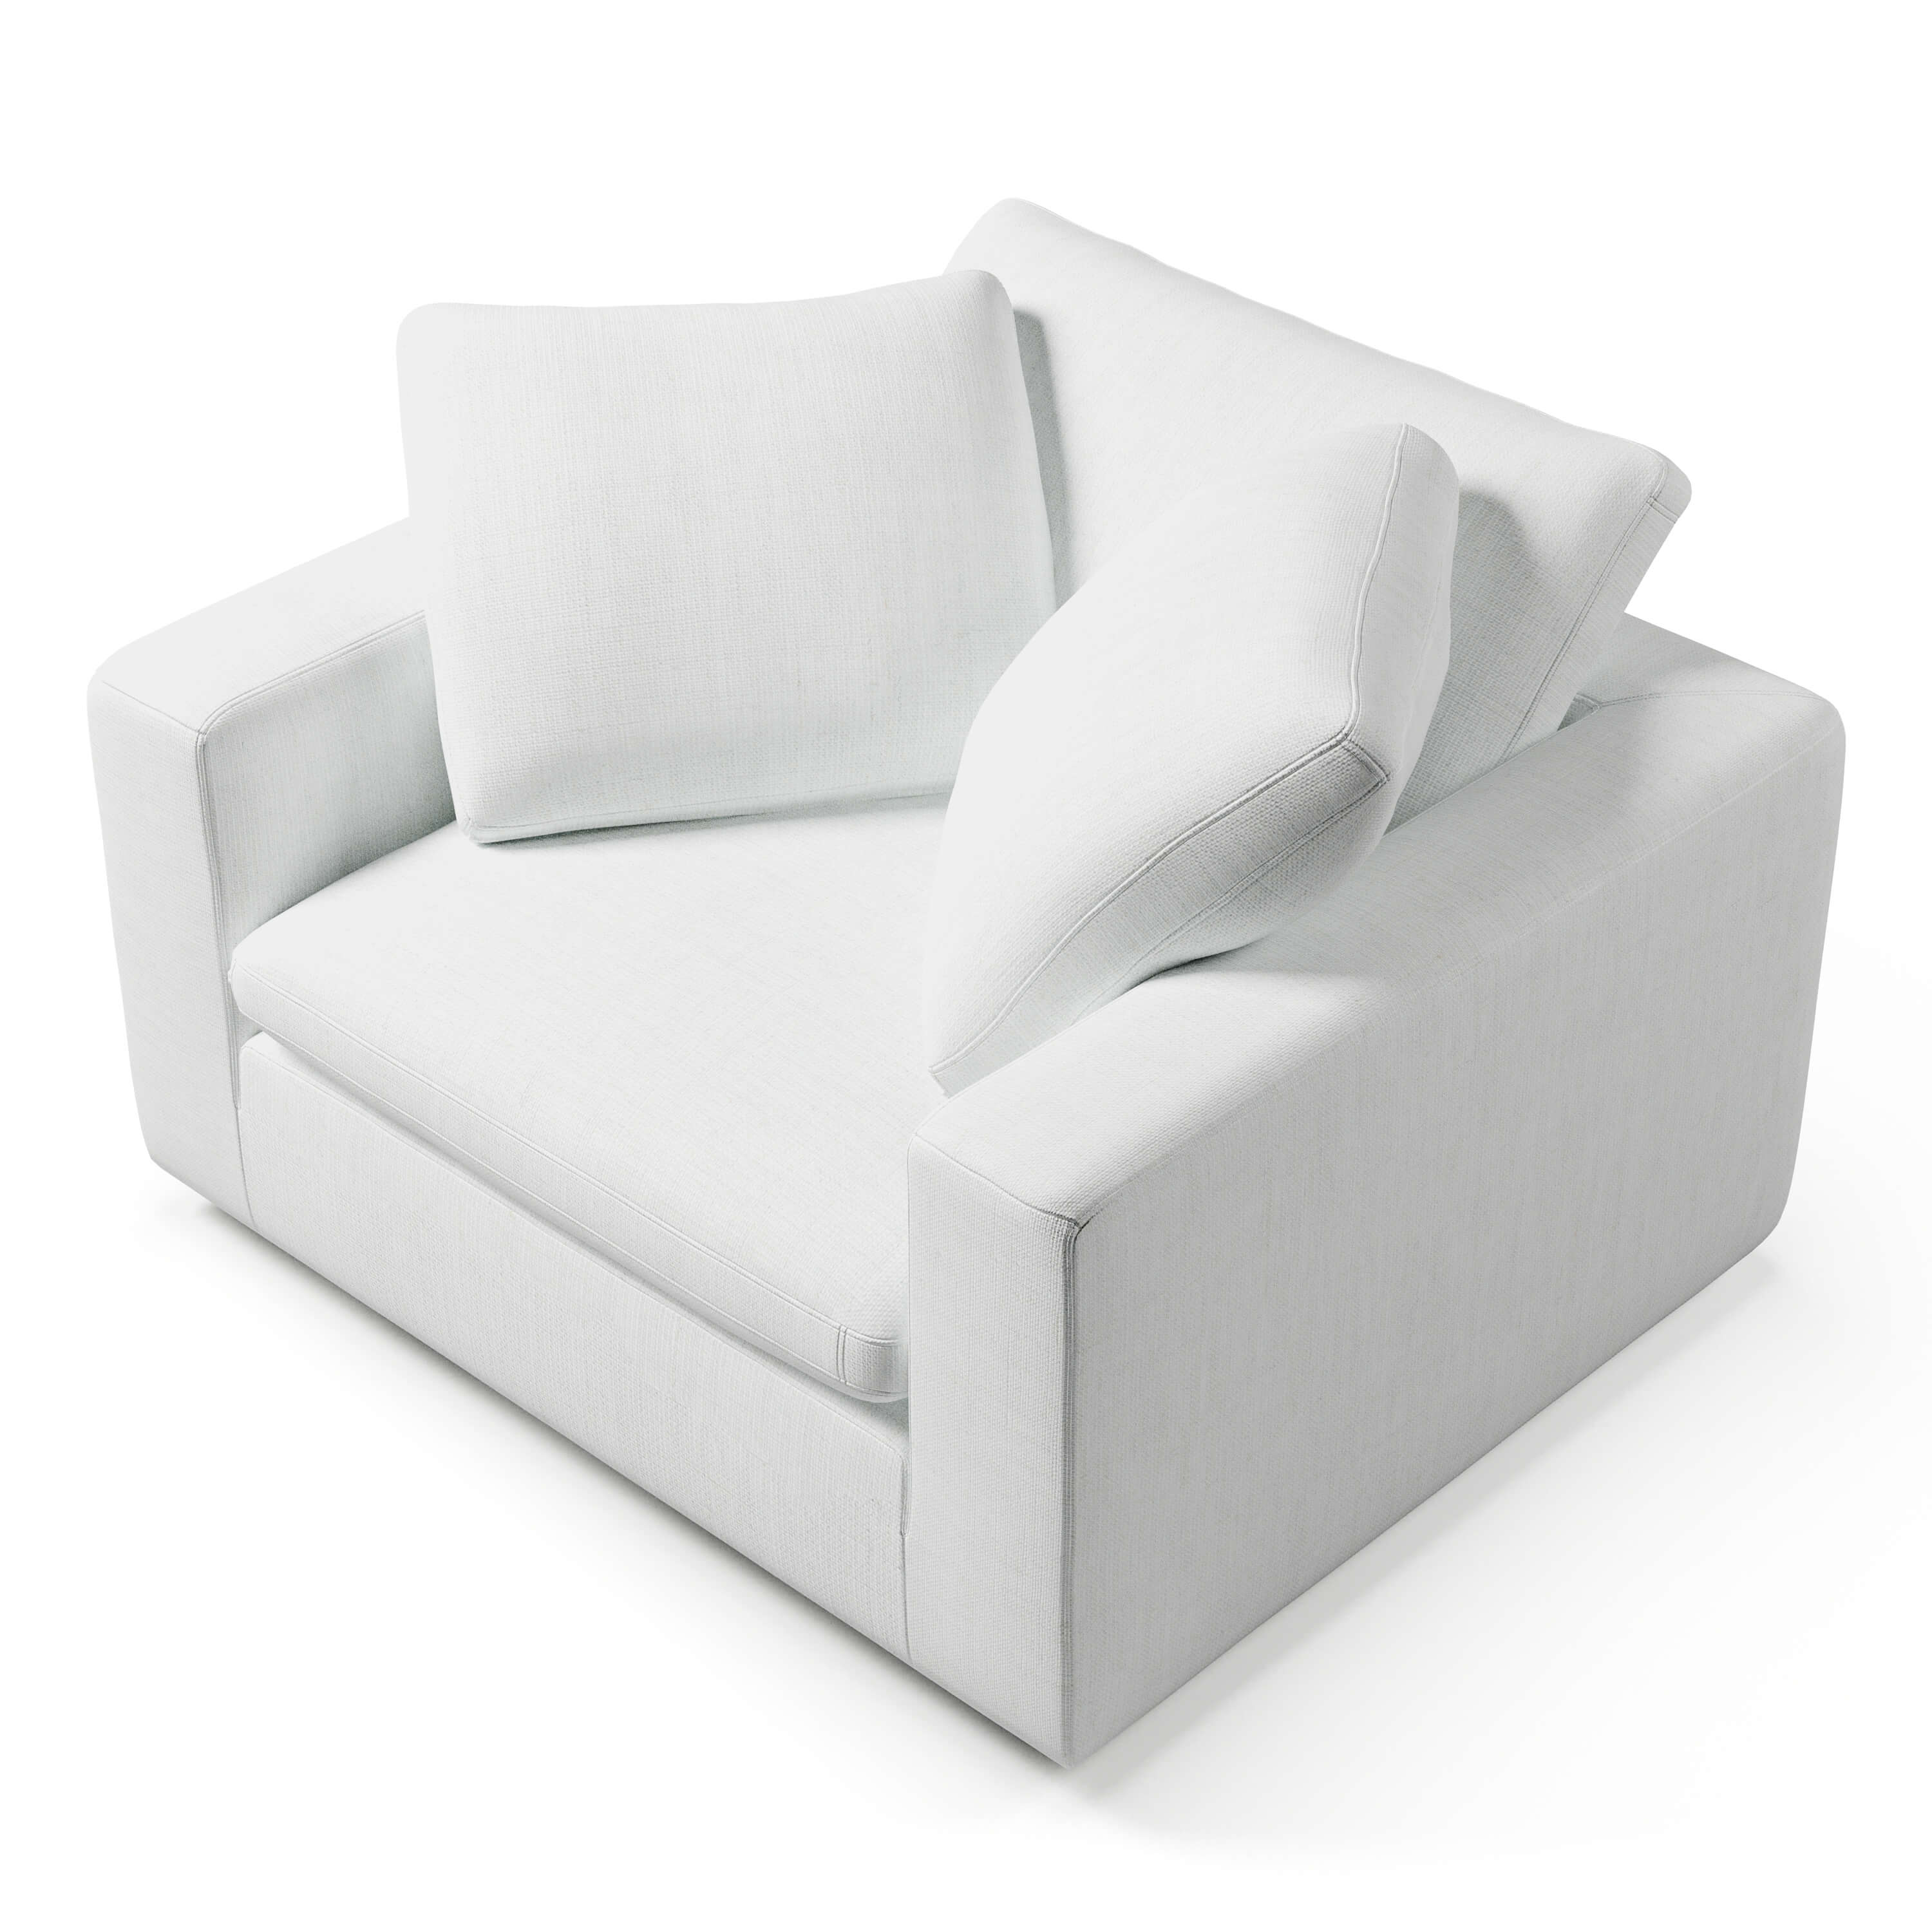 Comfy Lounge Chair | White Comfy Armchair | Couch Haus 